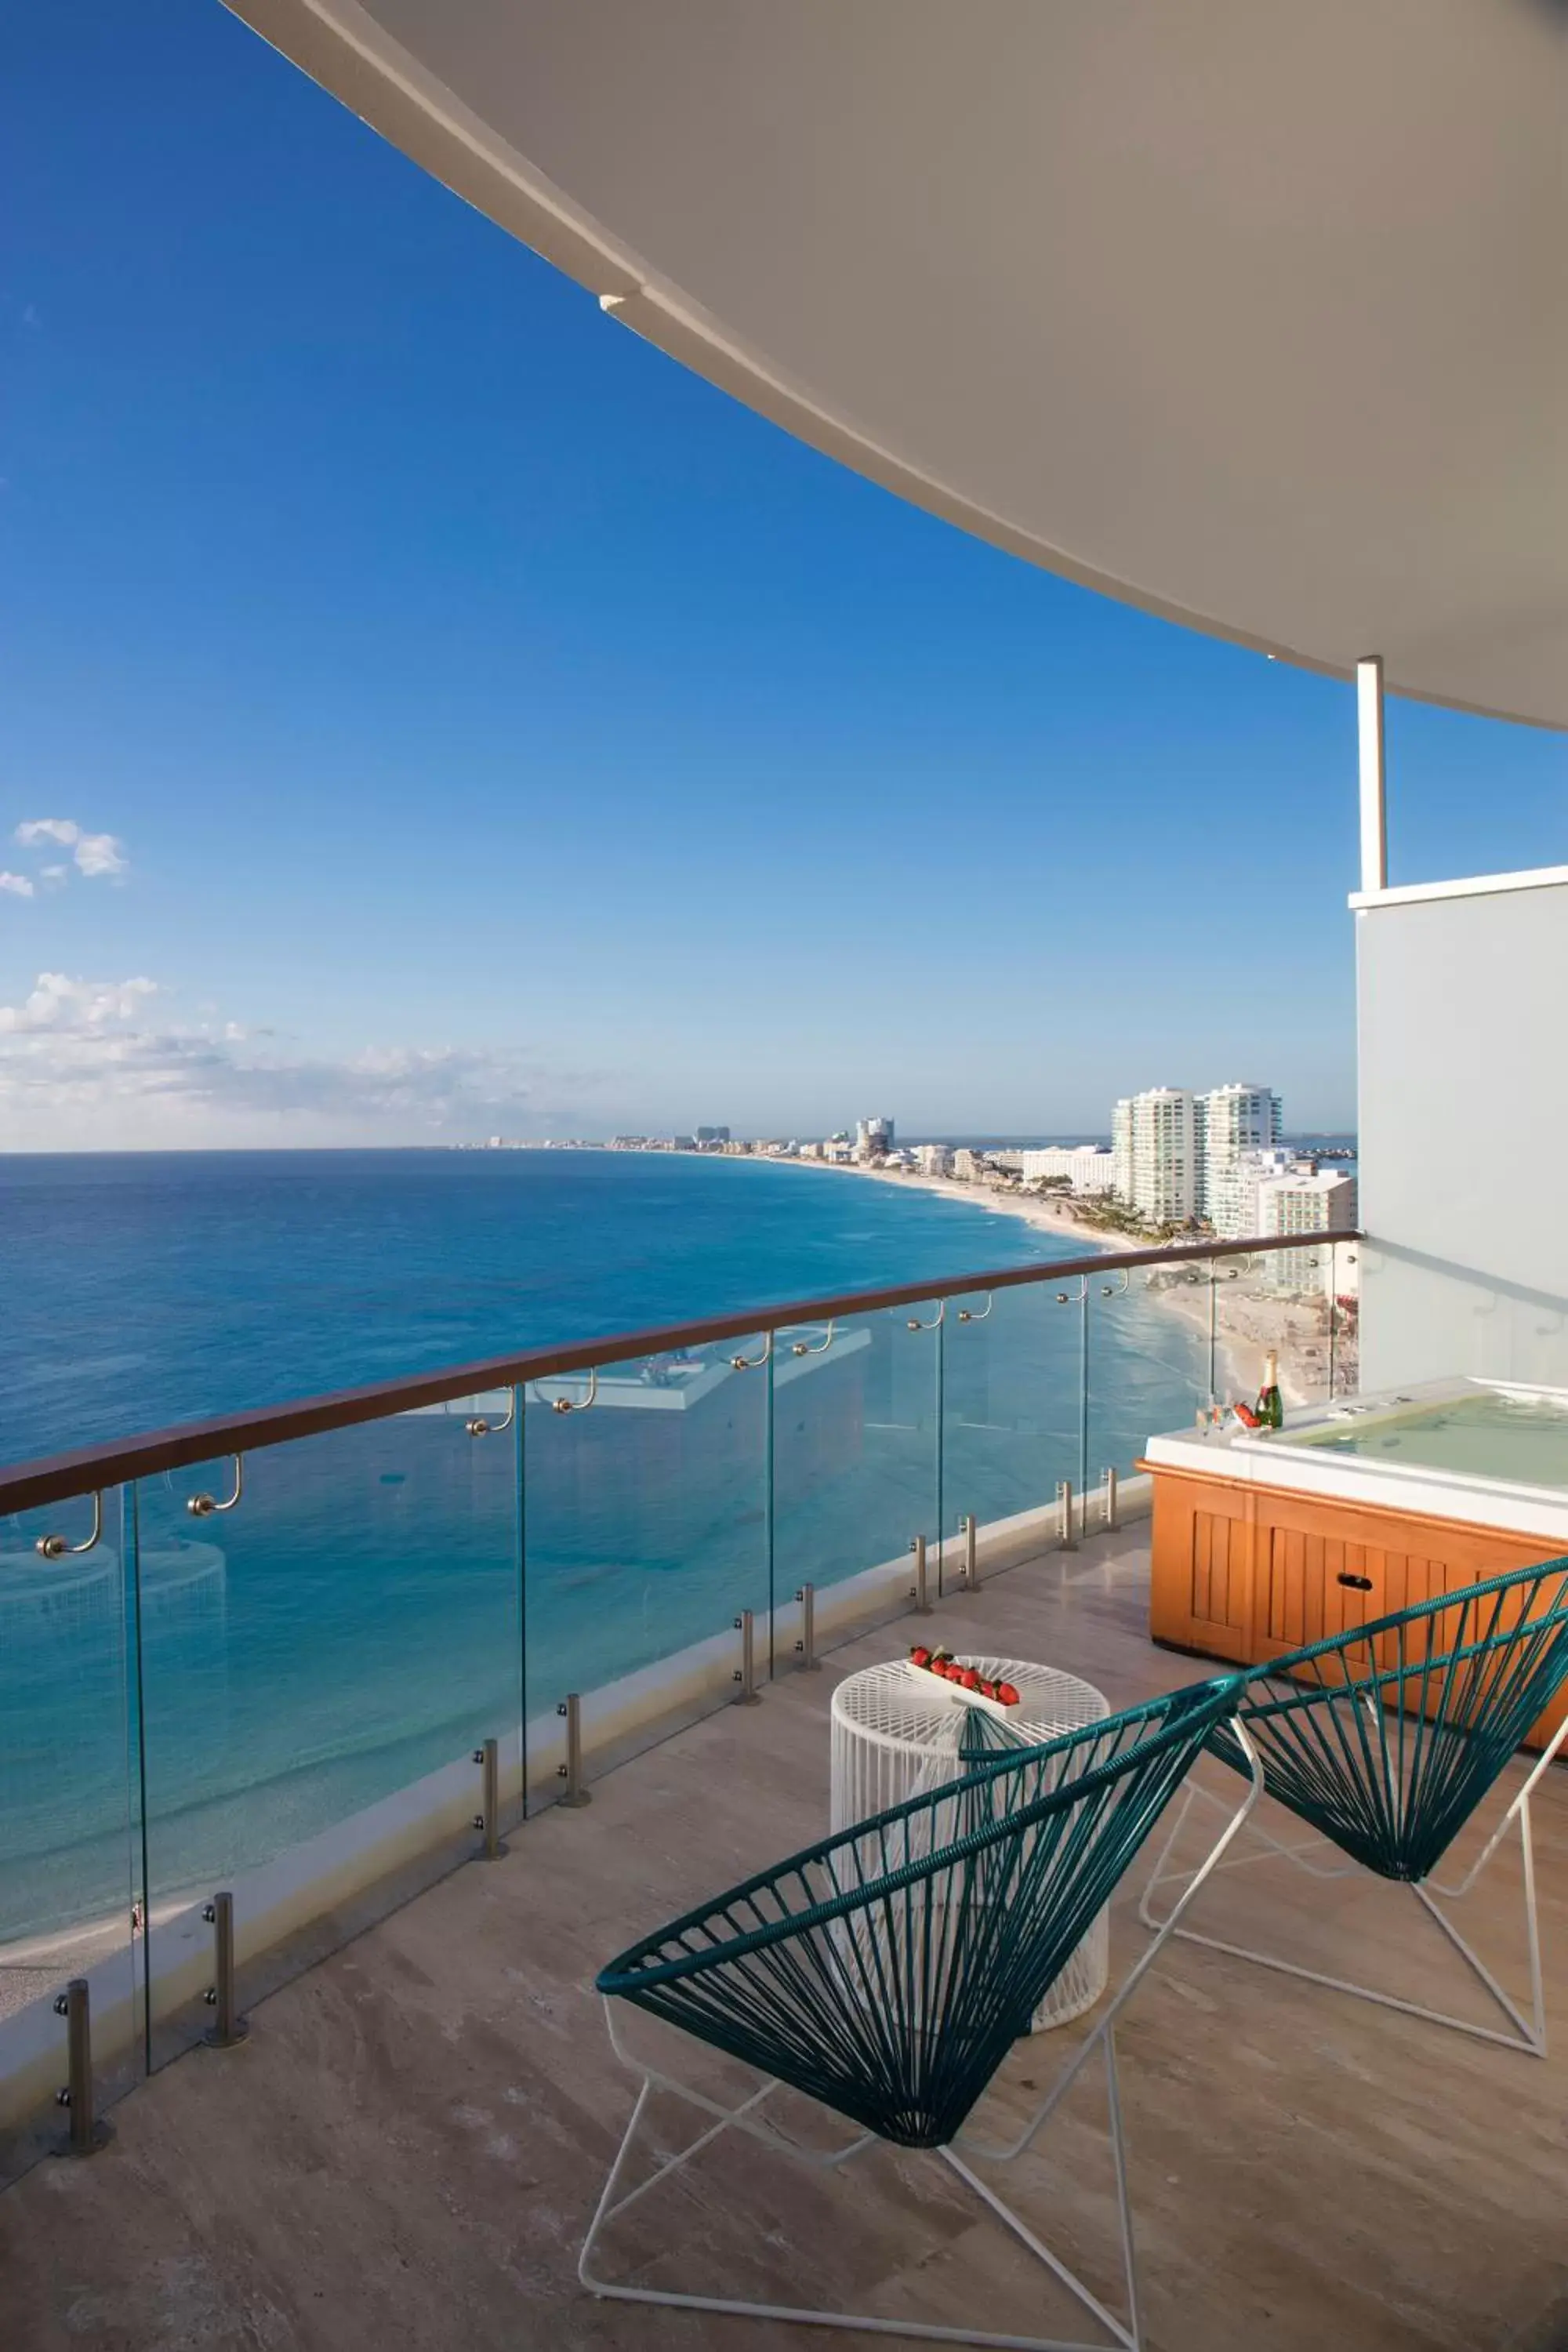 Balcony/Terrace in Altitude at Krystal Grand Cancun - All Inclusive